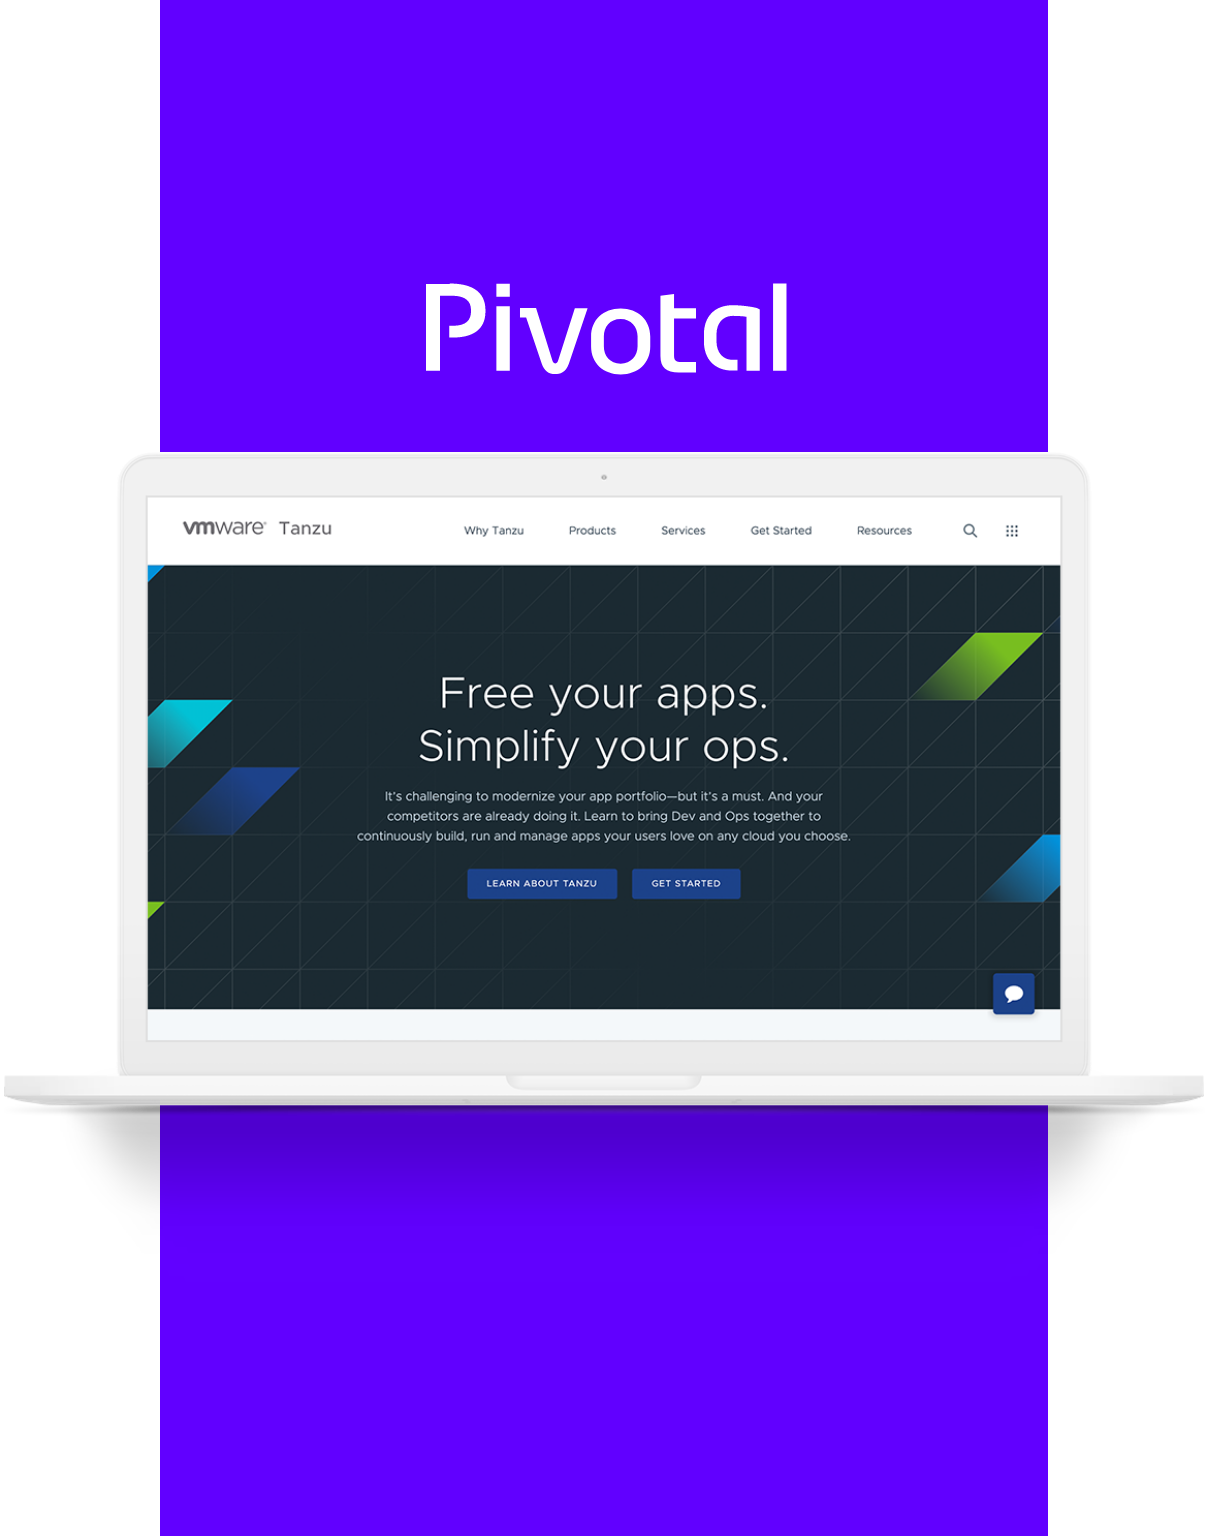 Pivotal homepage as seen on laptop.